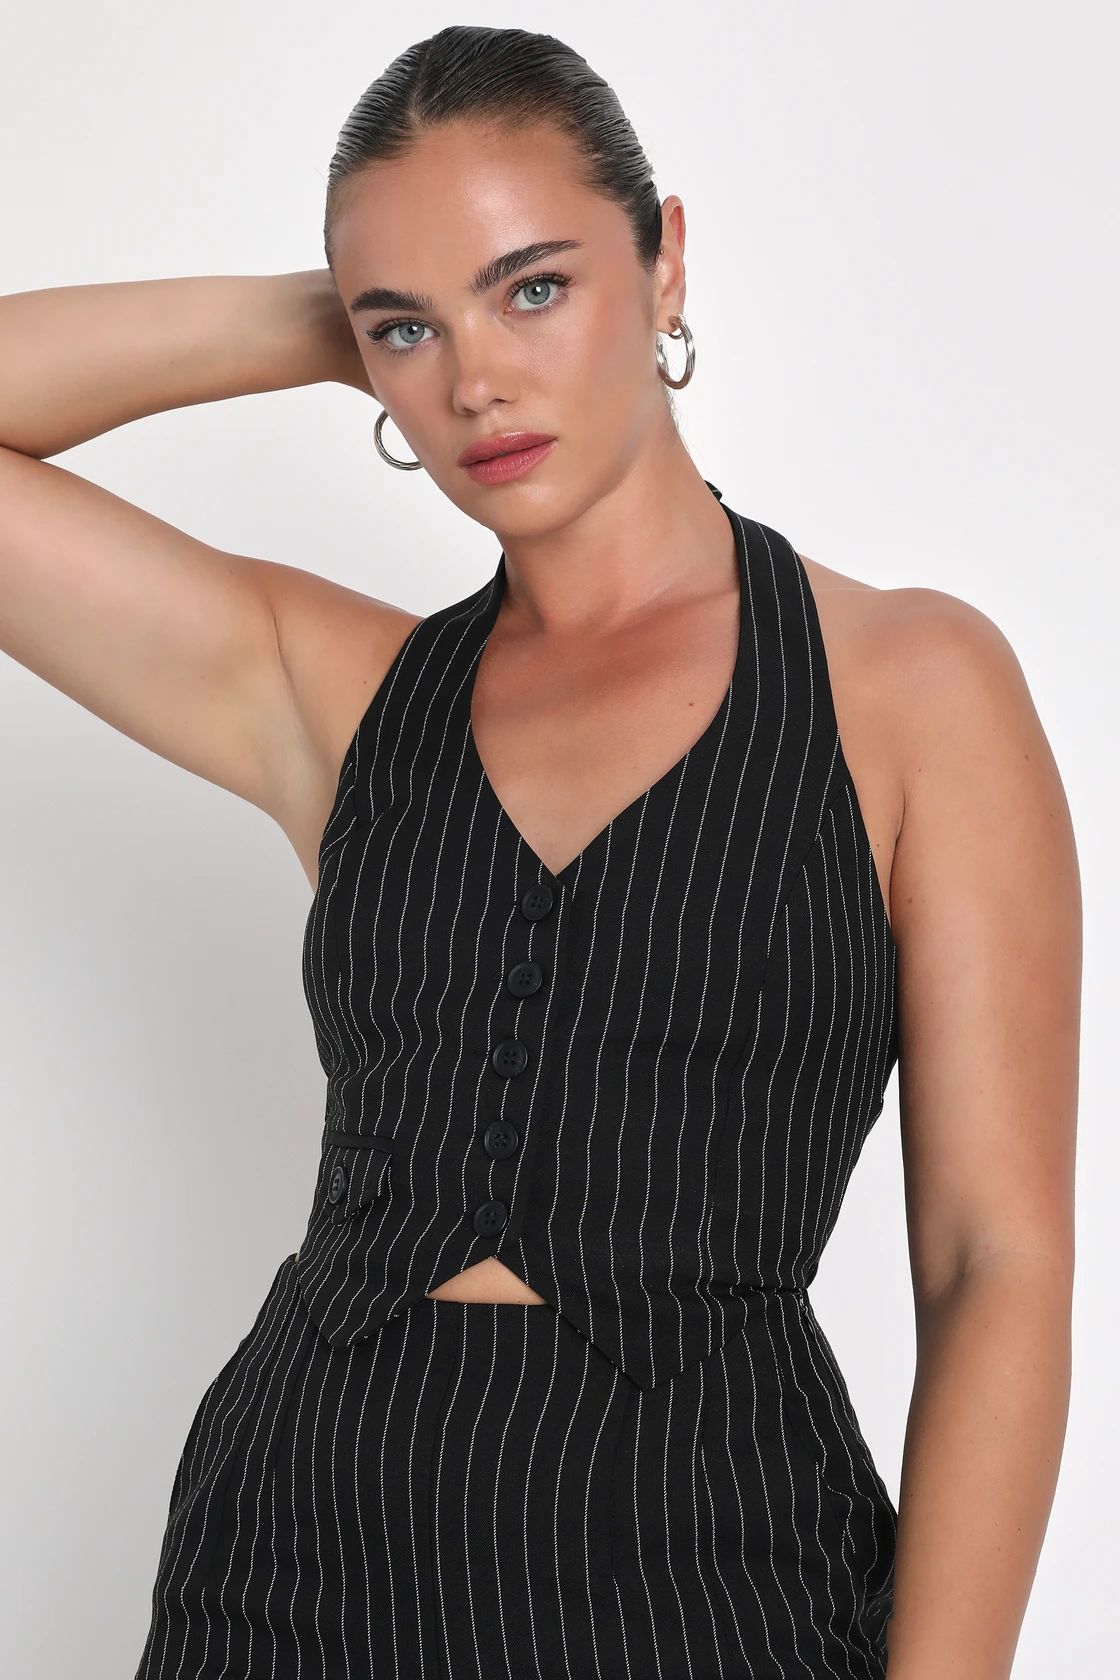 Pur-Suit of Chic Black and White Pinstripe Vest Top | Lulus (US)